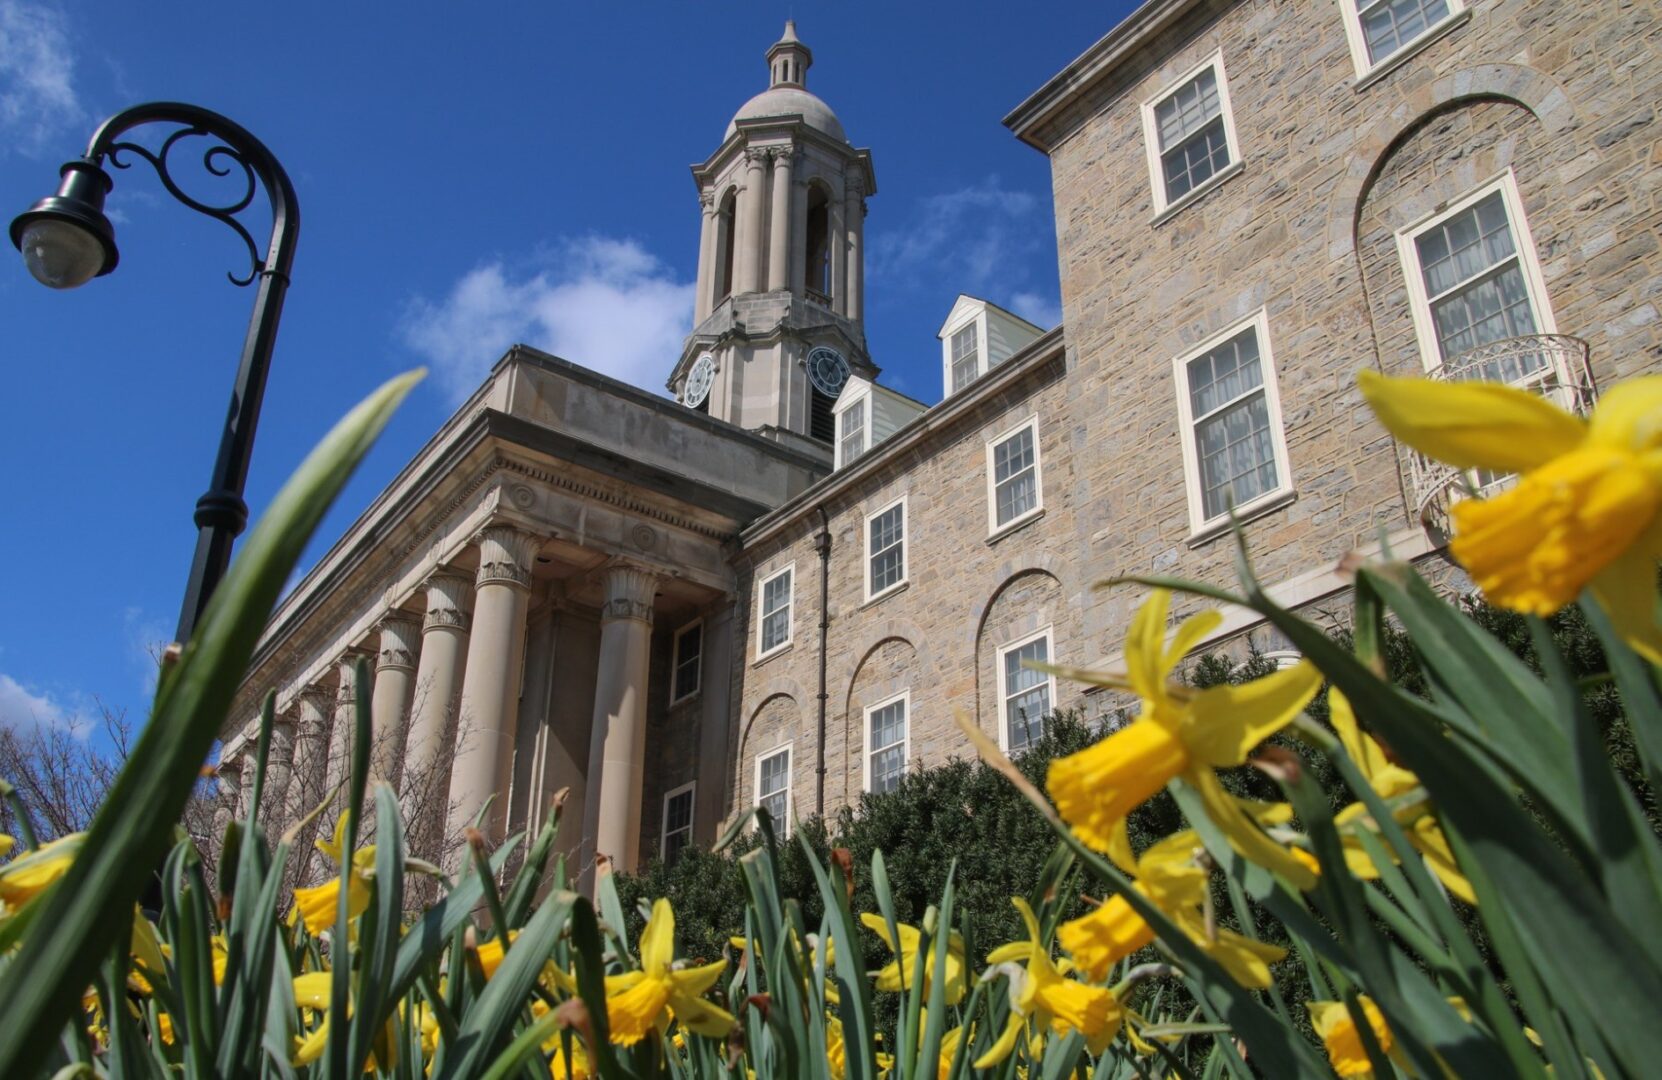 Yellow flowers blossom in front of Penn State's Old Main building